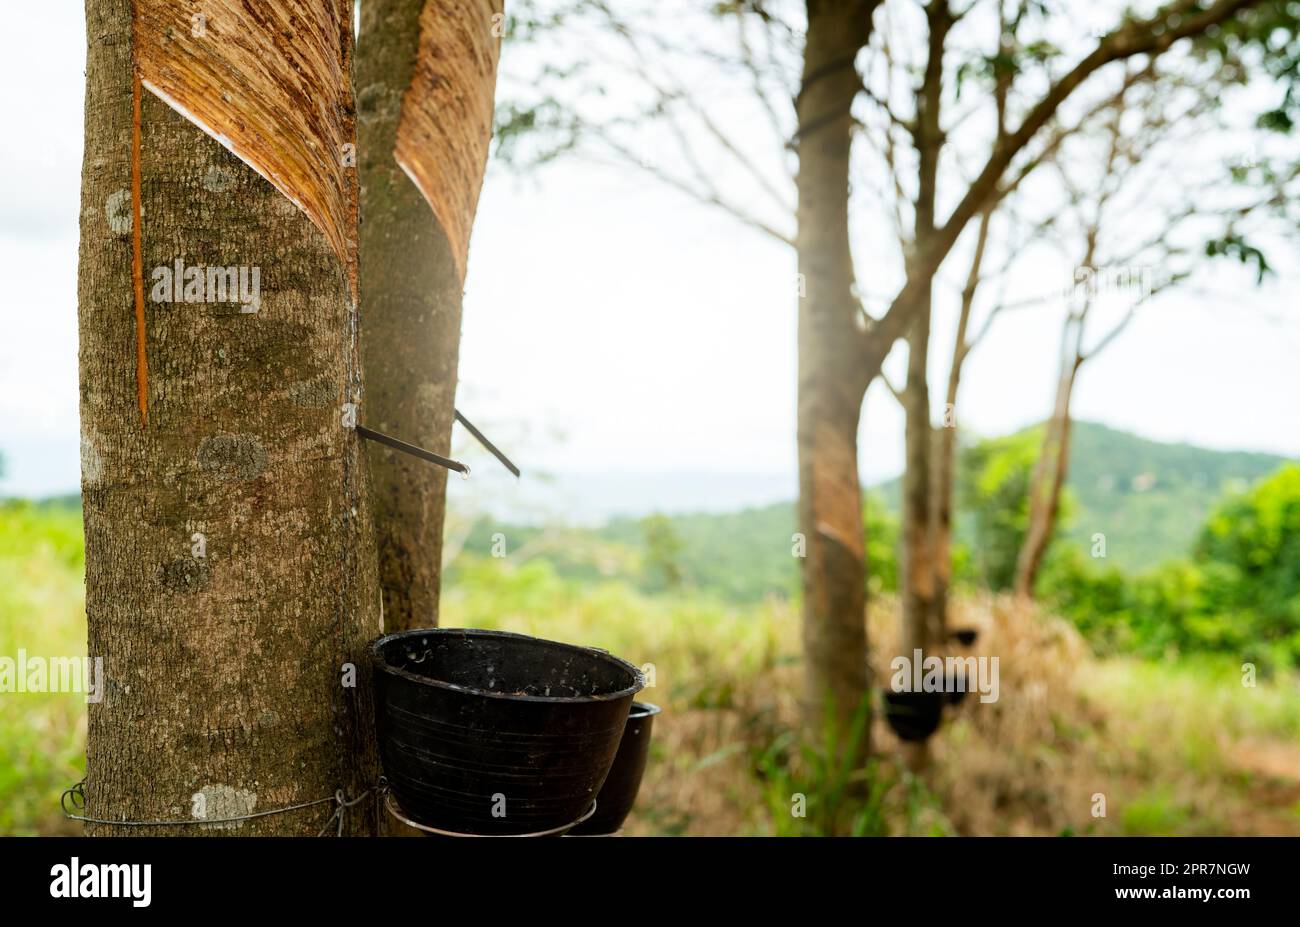 Rubber tapping in rubber tree garden. Natural latex extracted from para rubber plant. Rubber tree plantation. The milky liquid or latex oozes from wound of tree bark. Latex collect in small bucket. Stock Photo